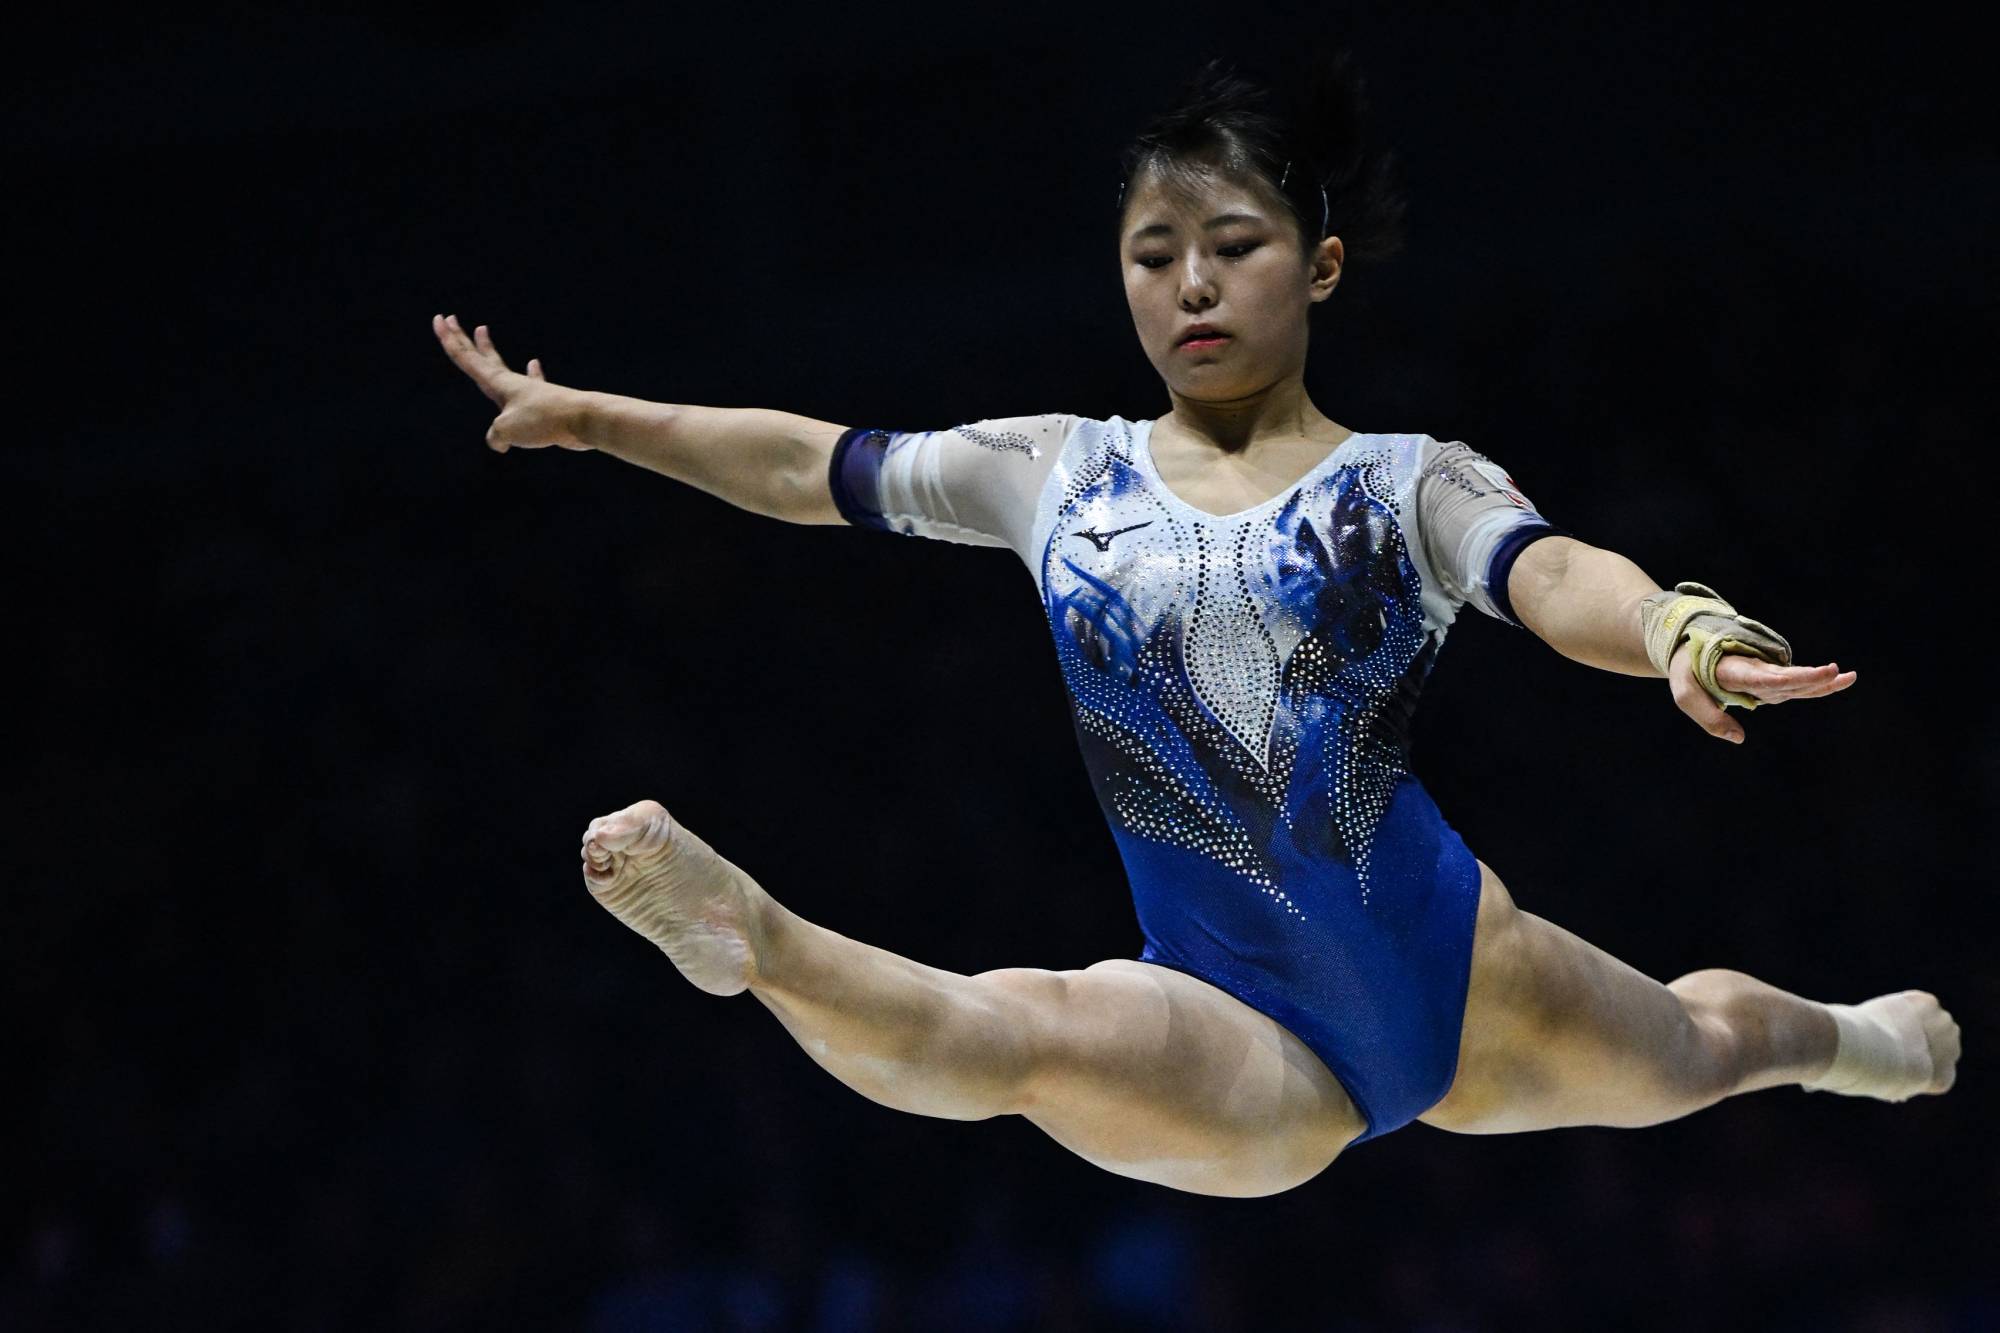 Hazuki Watanabe becomes youngest Japanese woman to win title at